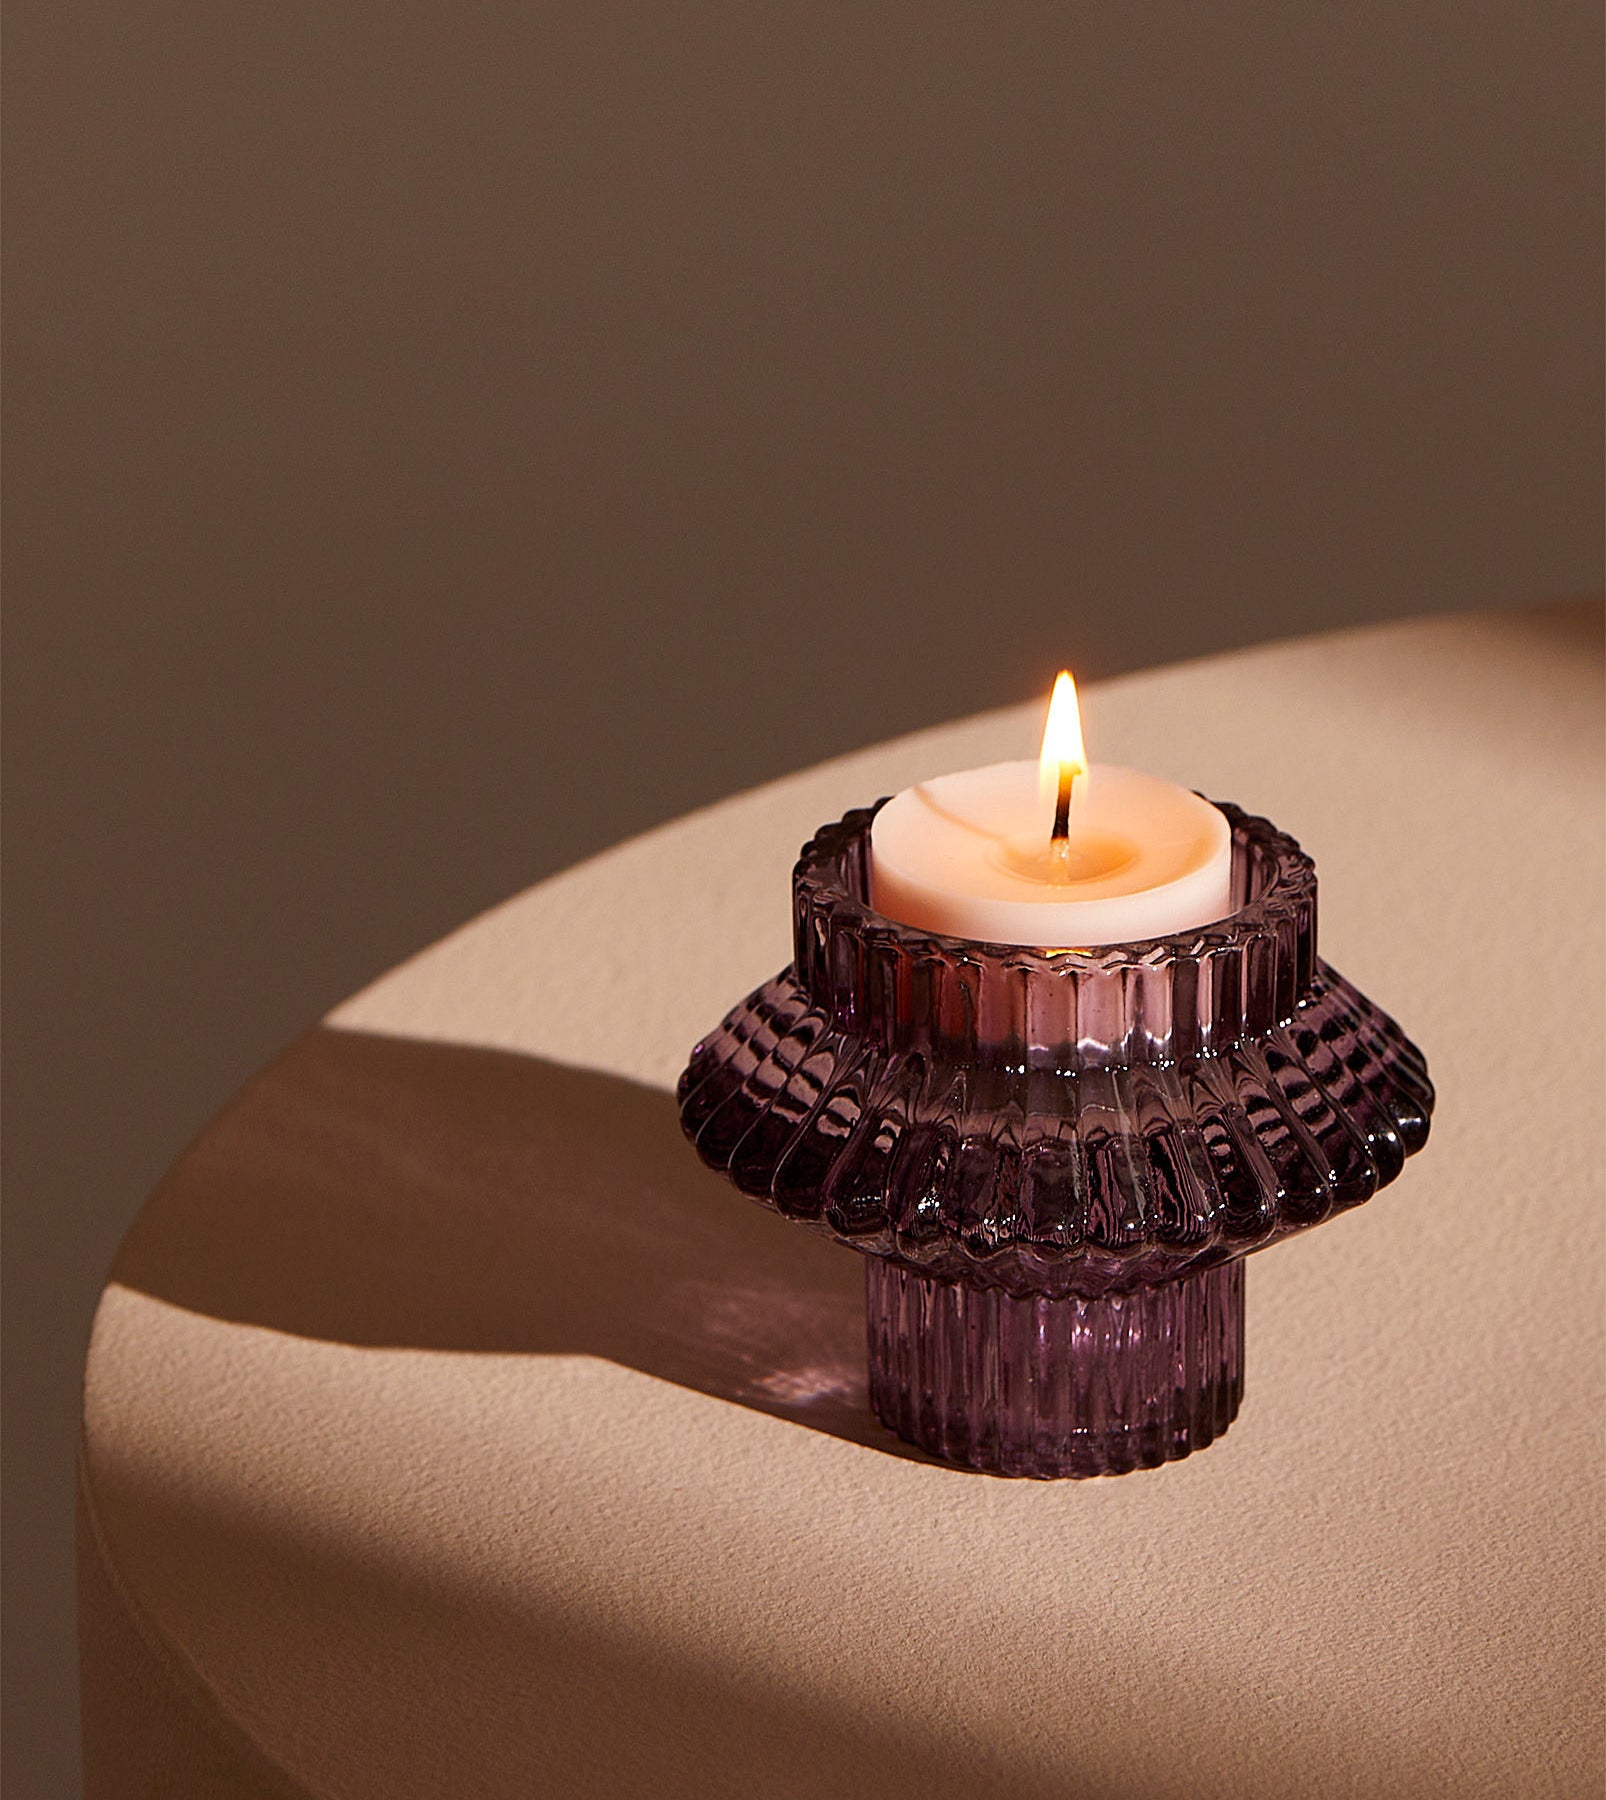 a double ended candle holder holding a tea light